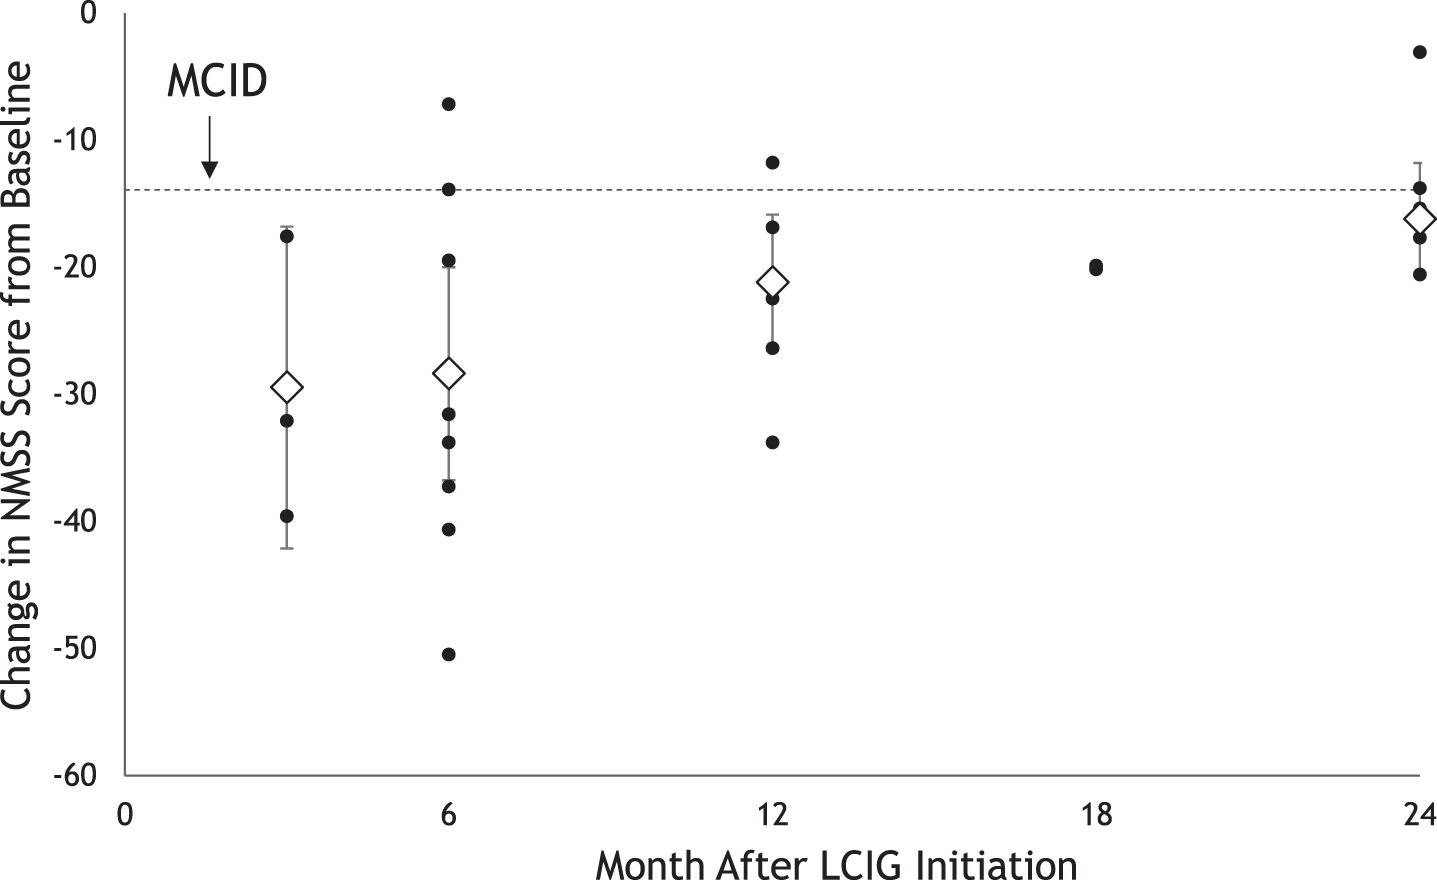 Impact of LCIG on Non-Motor Symptoms Up to 24 Months After Initiationa. LCIG, levodopa-carbidopa intestinal gel; MCID, minimum clinically important difference; NMSS, Non-Motor Symptoms Scale. aBlack circles represent reported mean change from baseline. Diamonds represent pooled mean change from baseline with 95% CIs estimated using random effects meta-analysis.